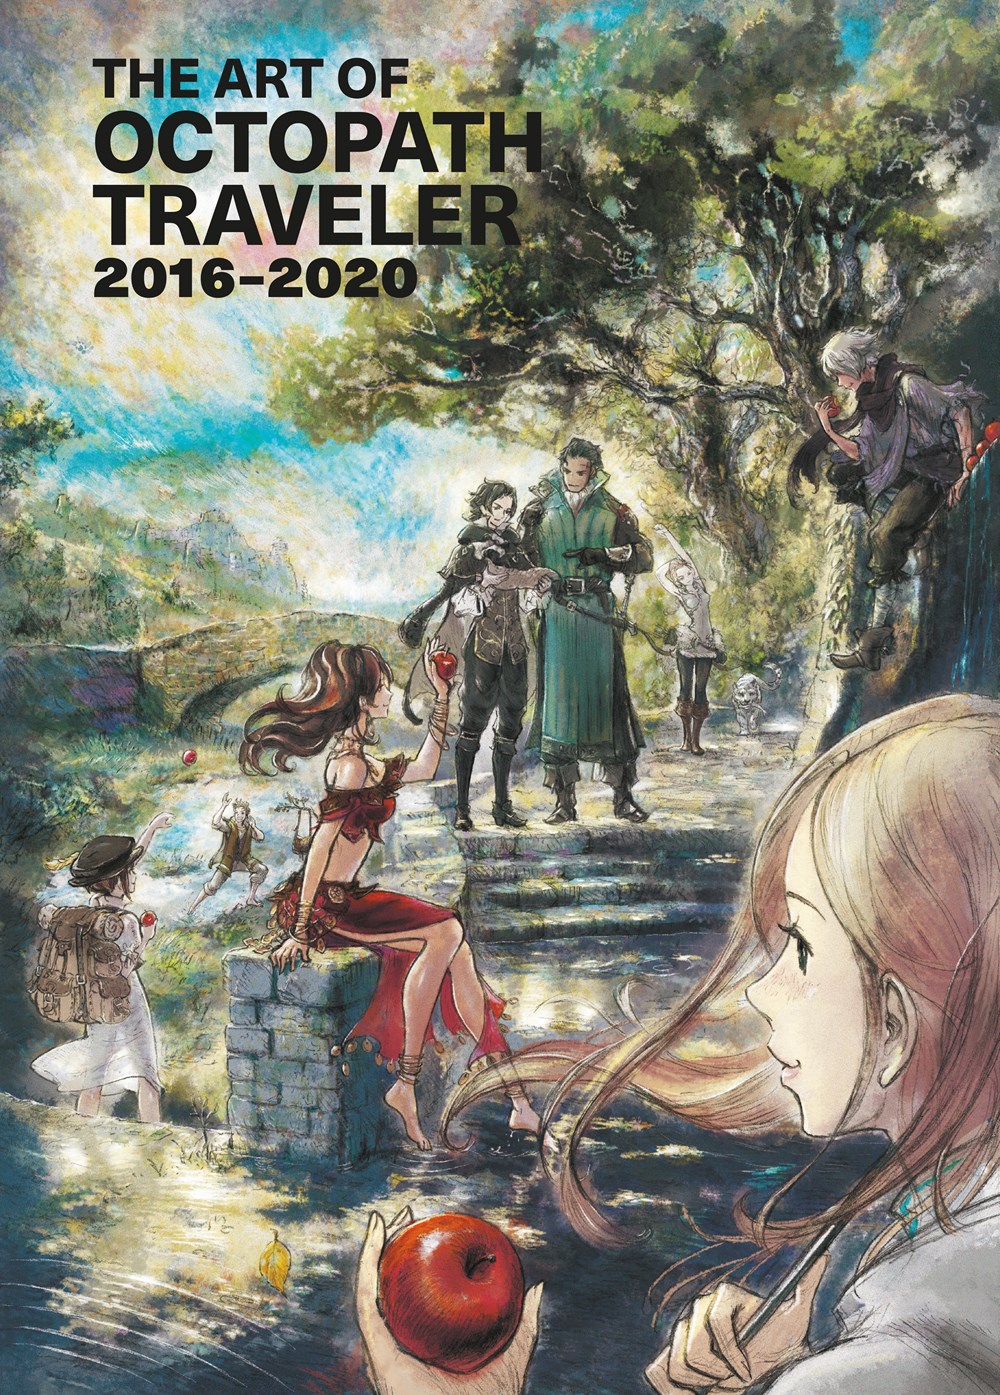 The Art of Octopath Traveler: 2016-2020 Art Book (Hardcover) image count 0